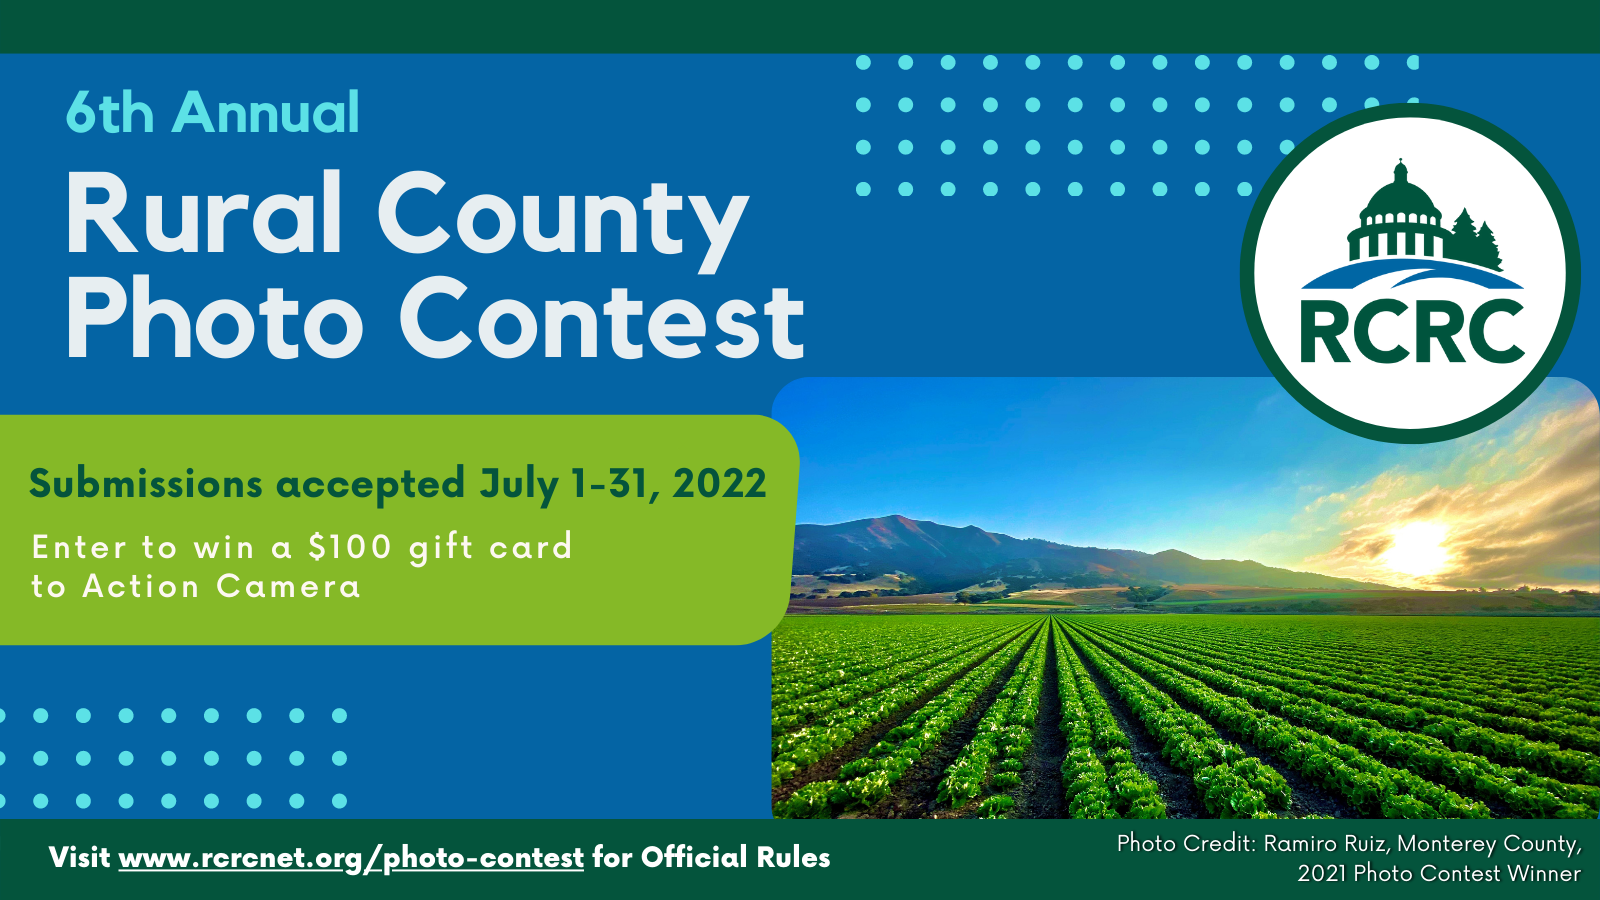 RCRC Launches Sixth Annual Rural County Photo Contest Rural Counties